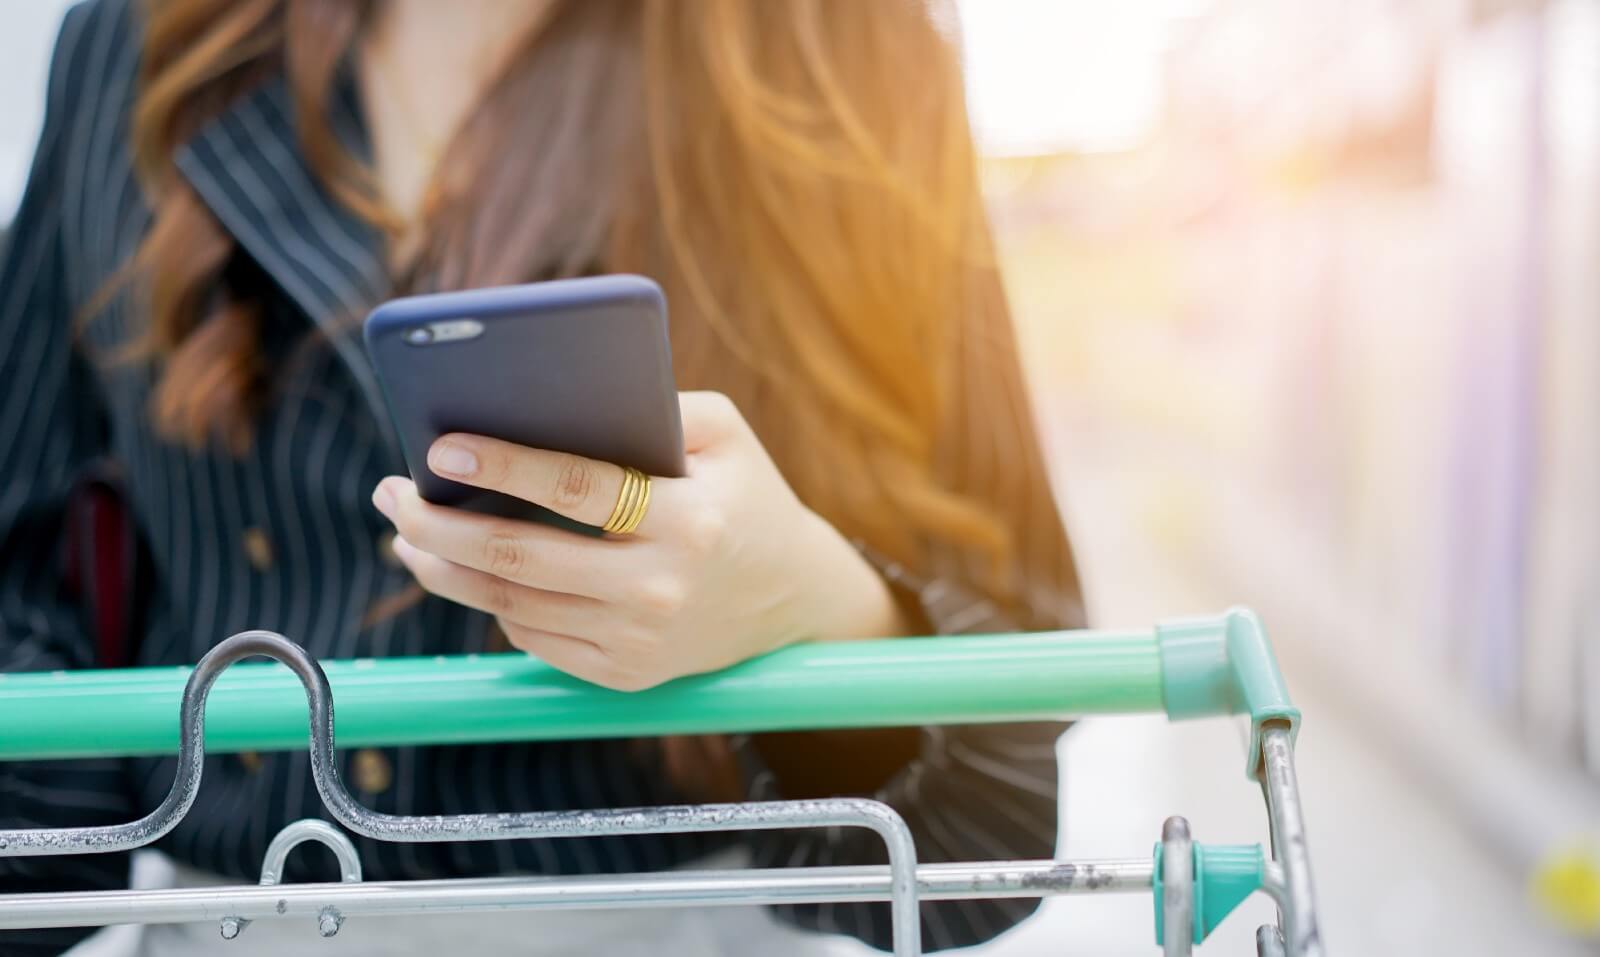 Woman pushing grocery cart while consulting phone